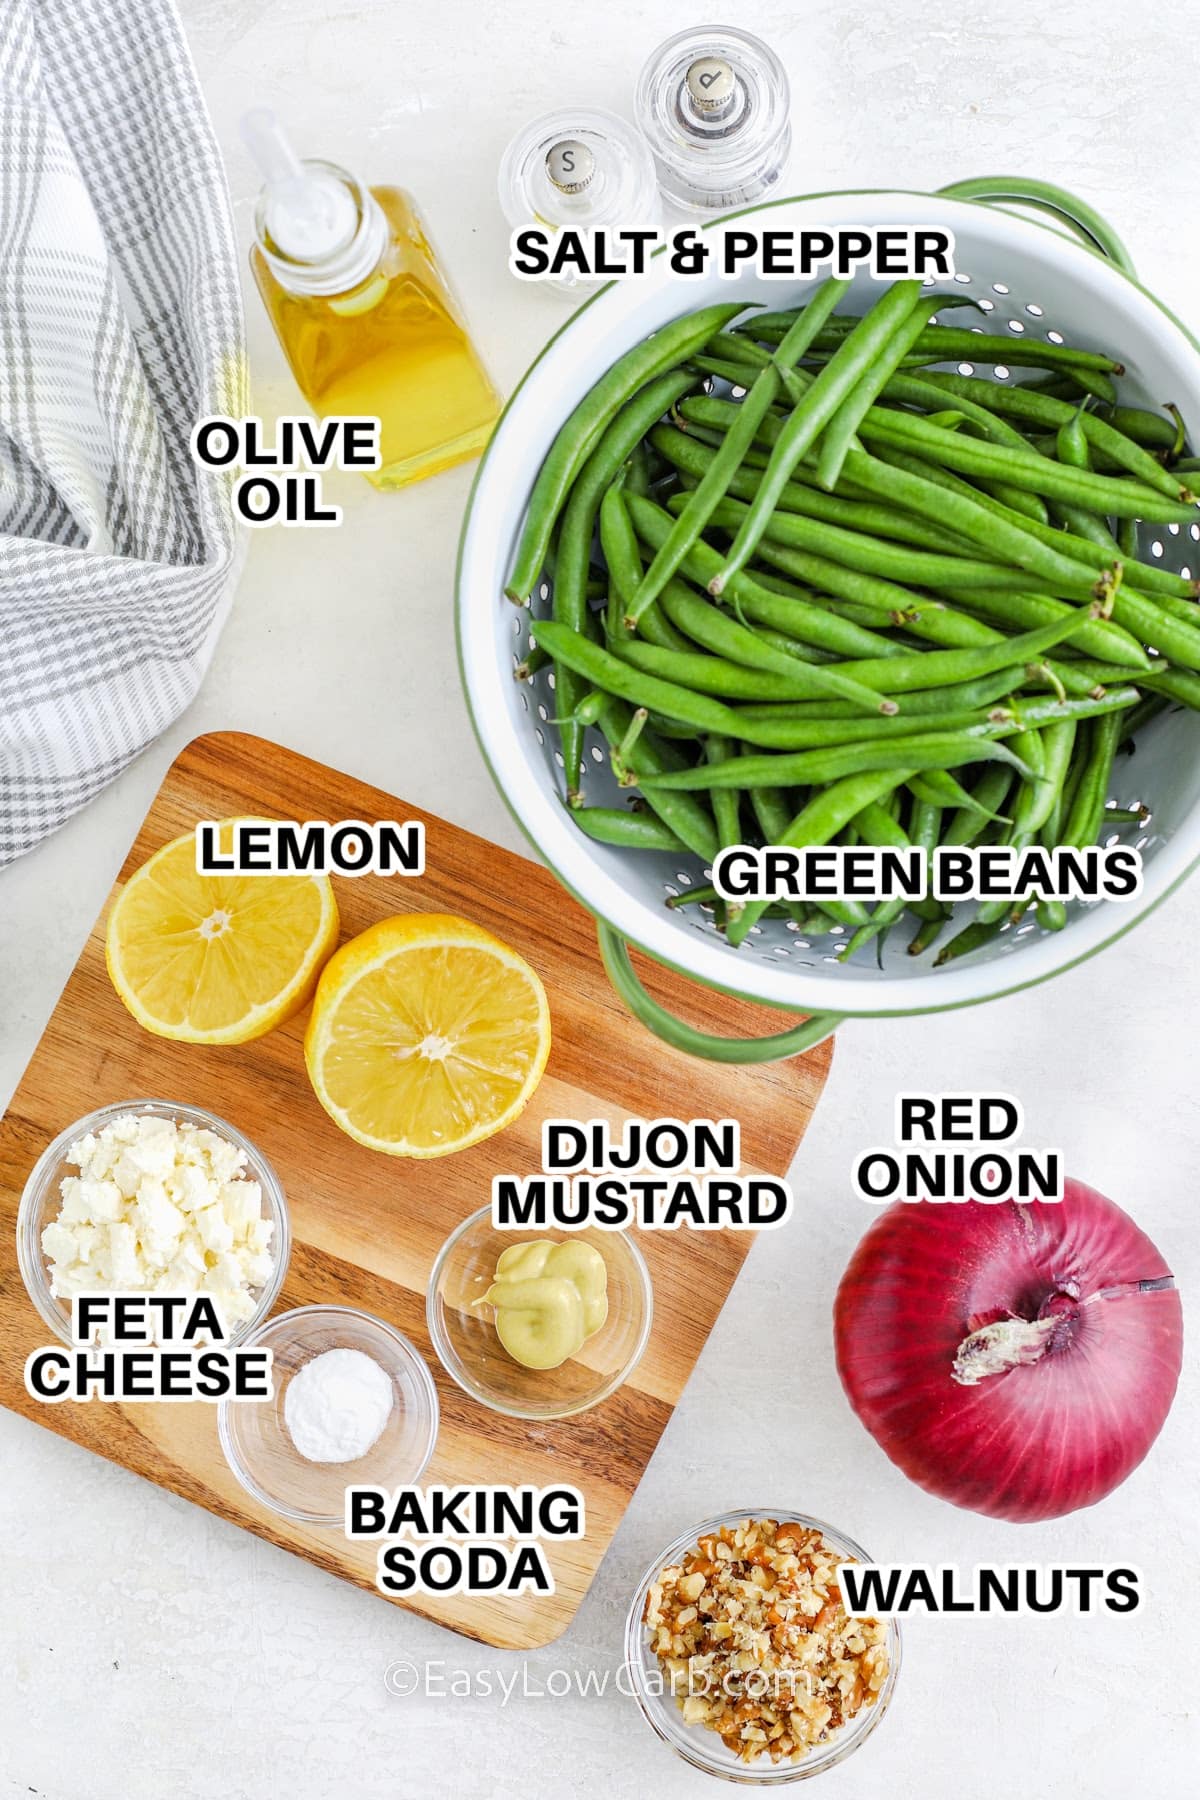 ingredients to make green bean salad labeled: green beans, olive oil, salt and pepper, lemon, feta cheese, dijon mustard, baking soda, red onion, and walnuts